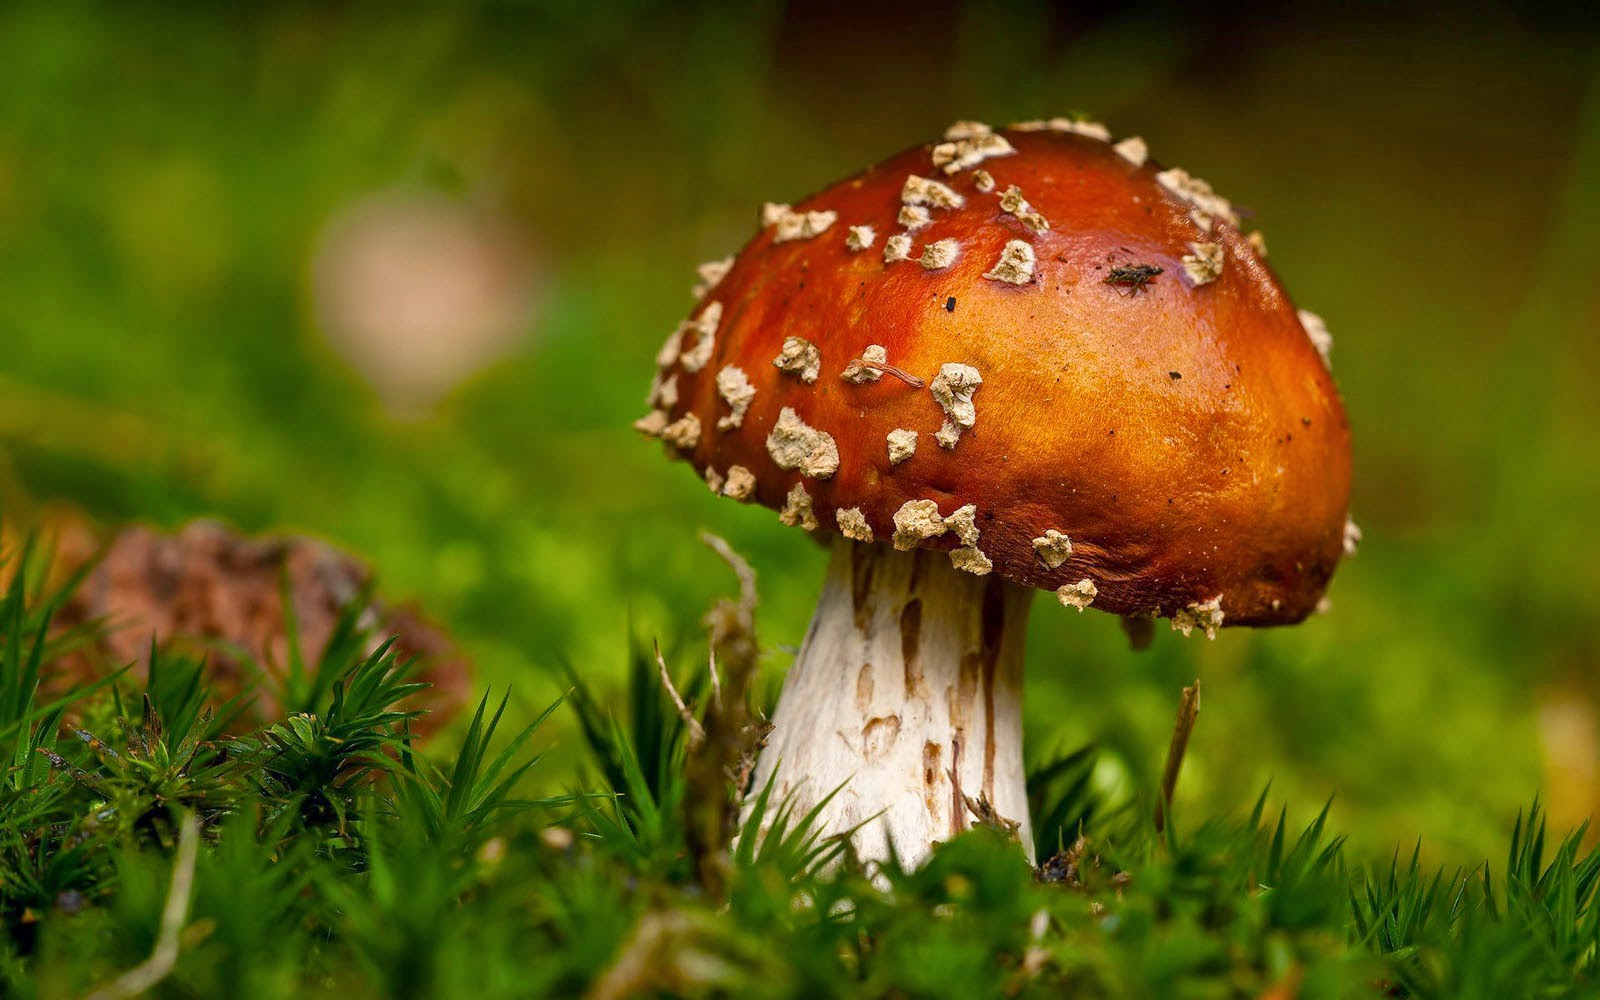 Tag Mushrooms Wallpapers Backgrounds Photos Images andPictures for